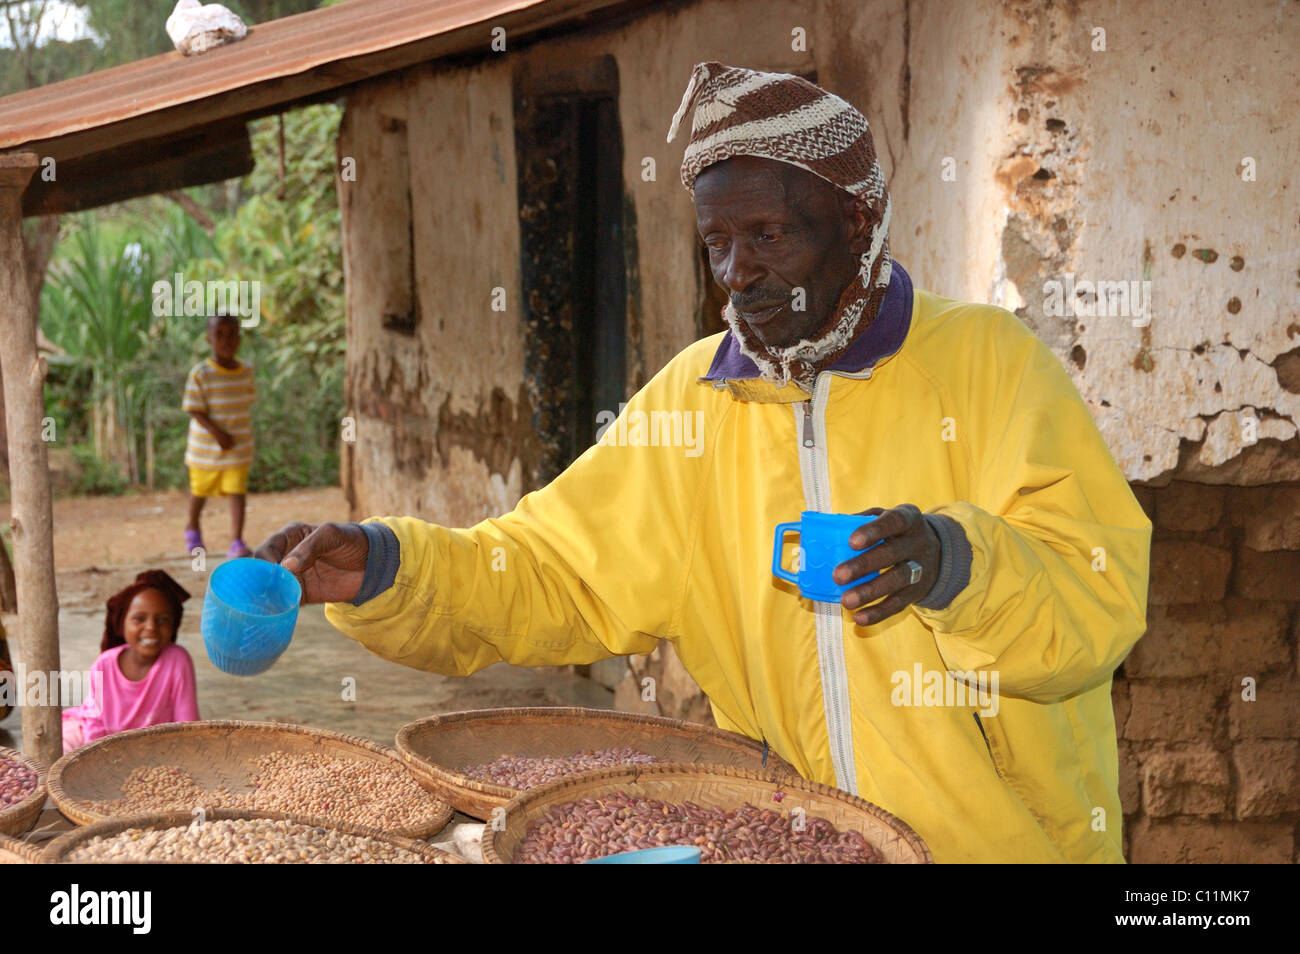 A man selling beans and grains in the town of Usa River near Arusha Tanzania Stock Photo